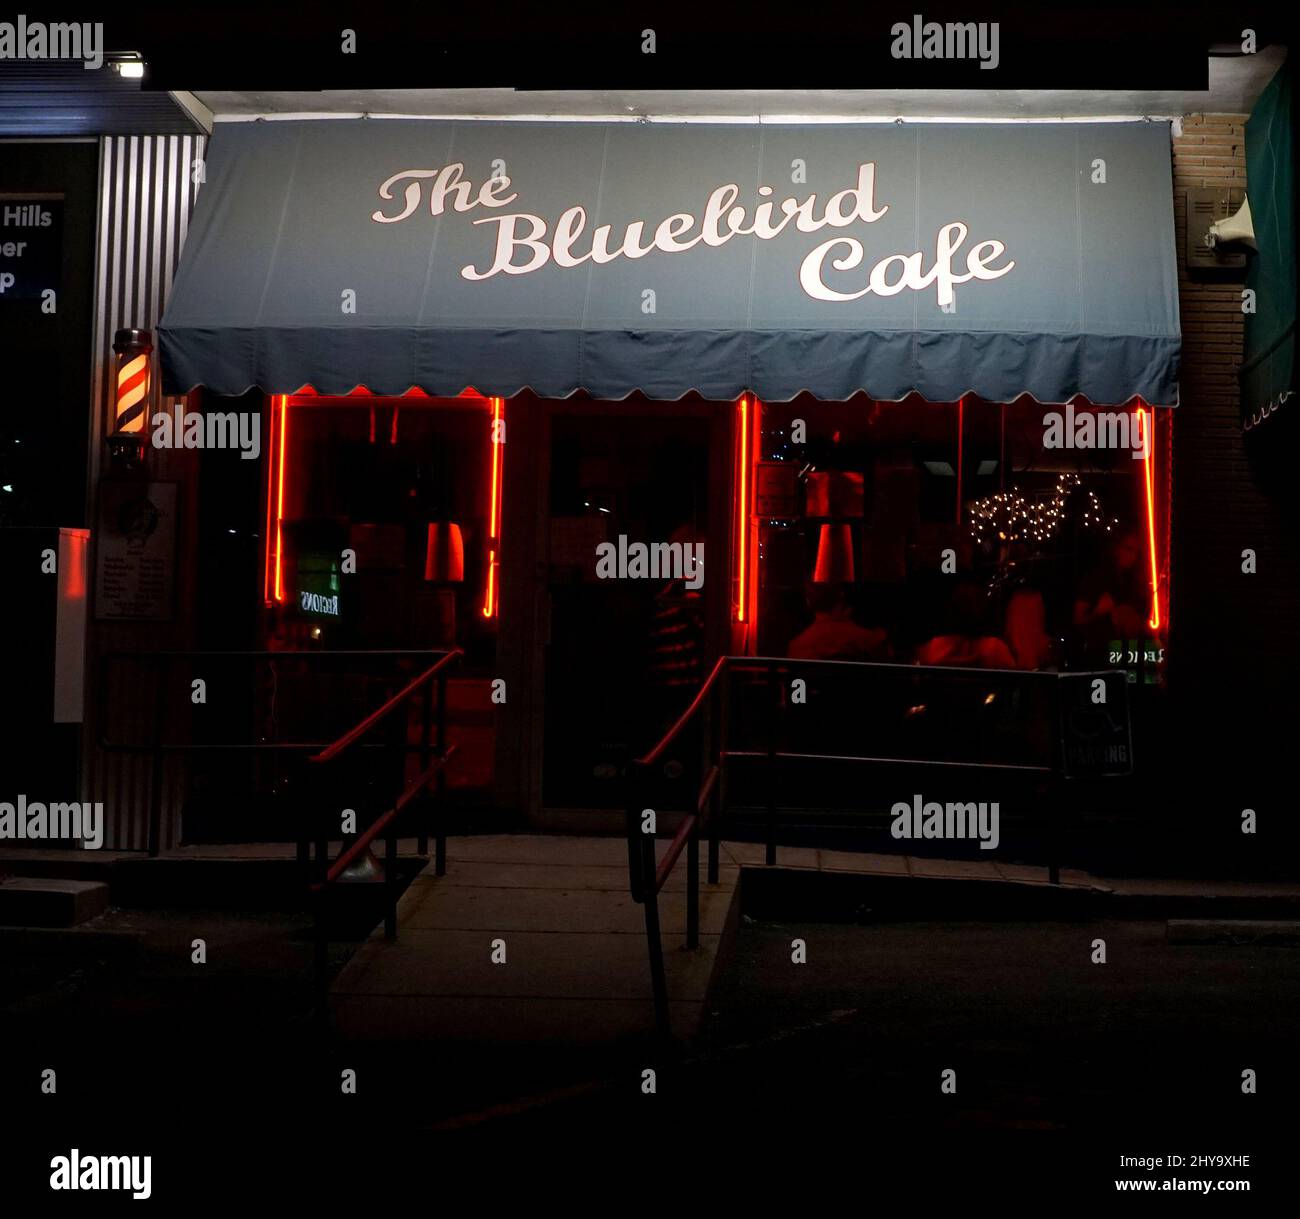 The Bluebird Cafe, Nashville. The Bluebird Cafe is known for showcasing upcoming new songwriters and performers. Stock Photo